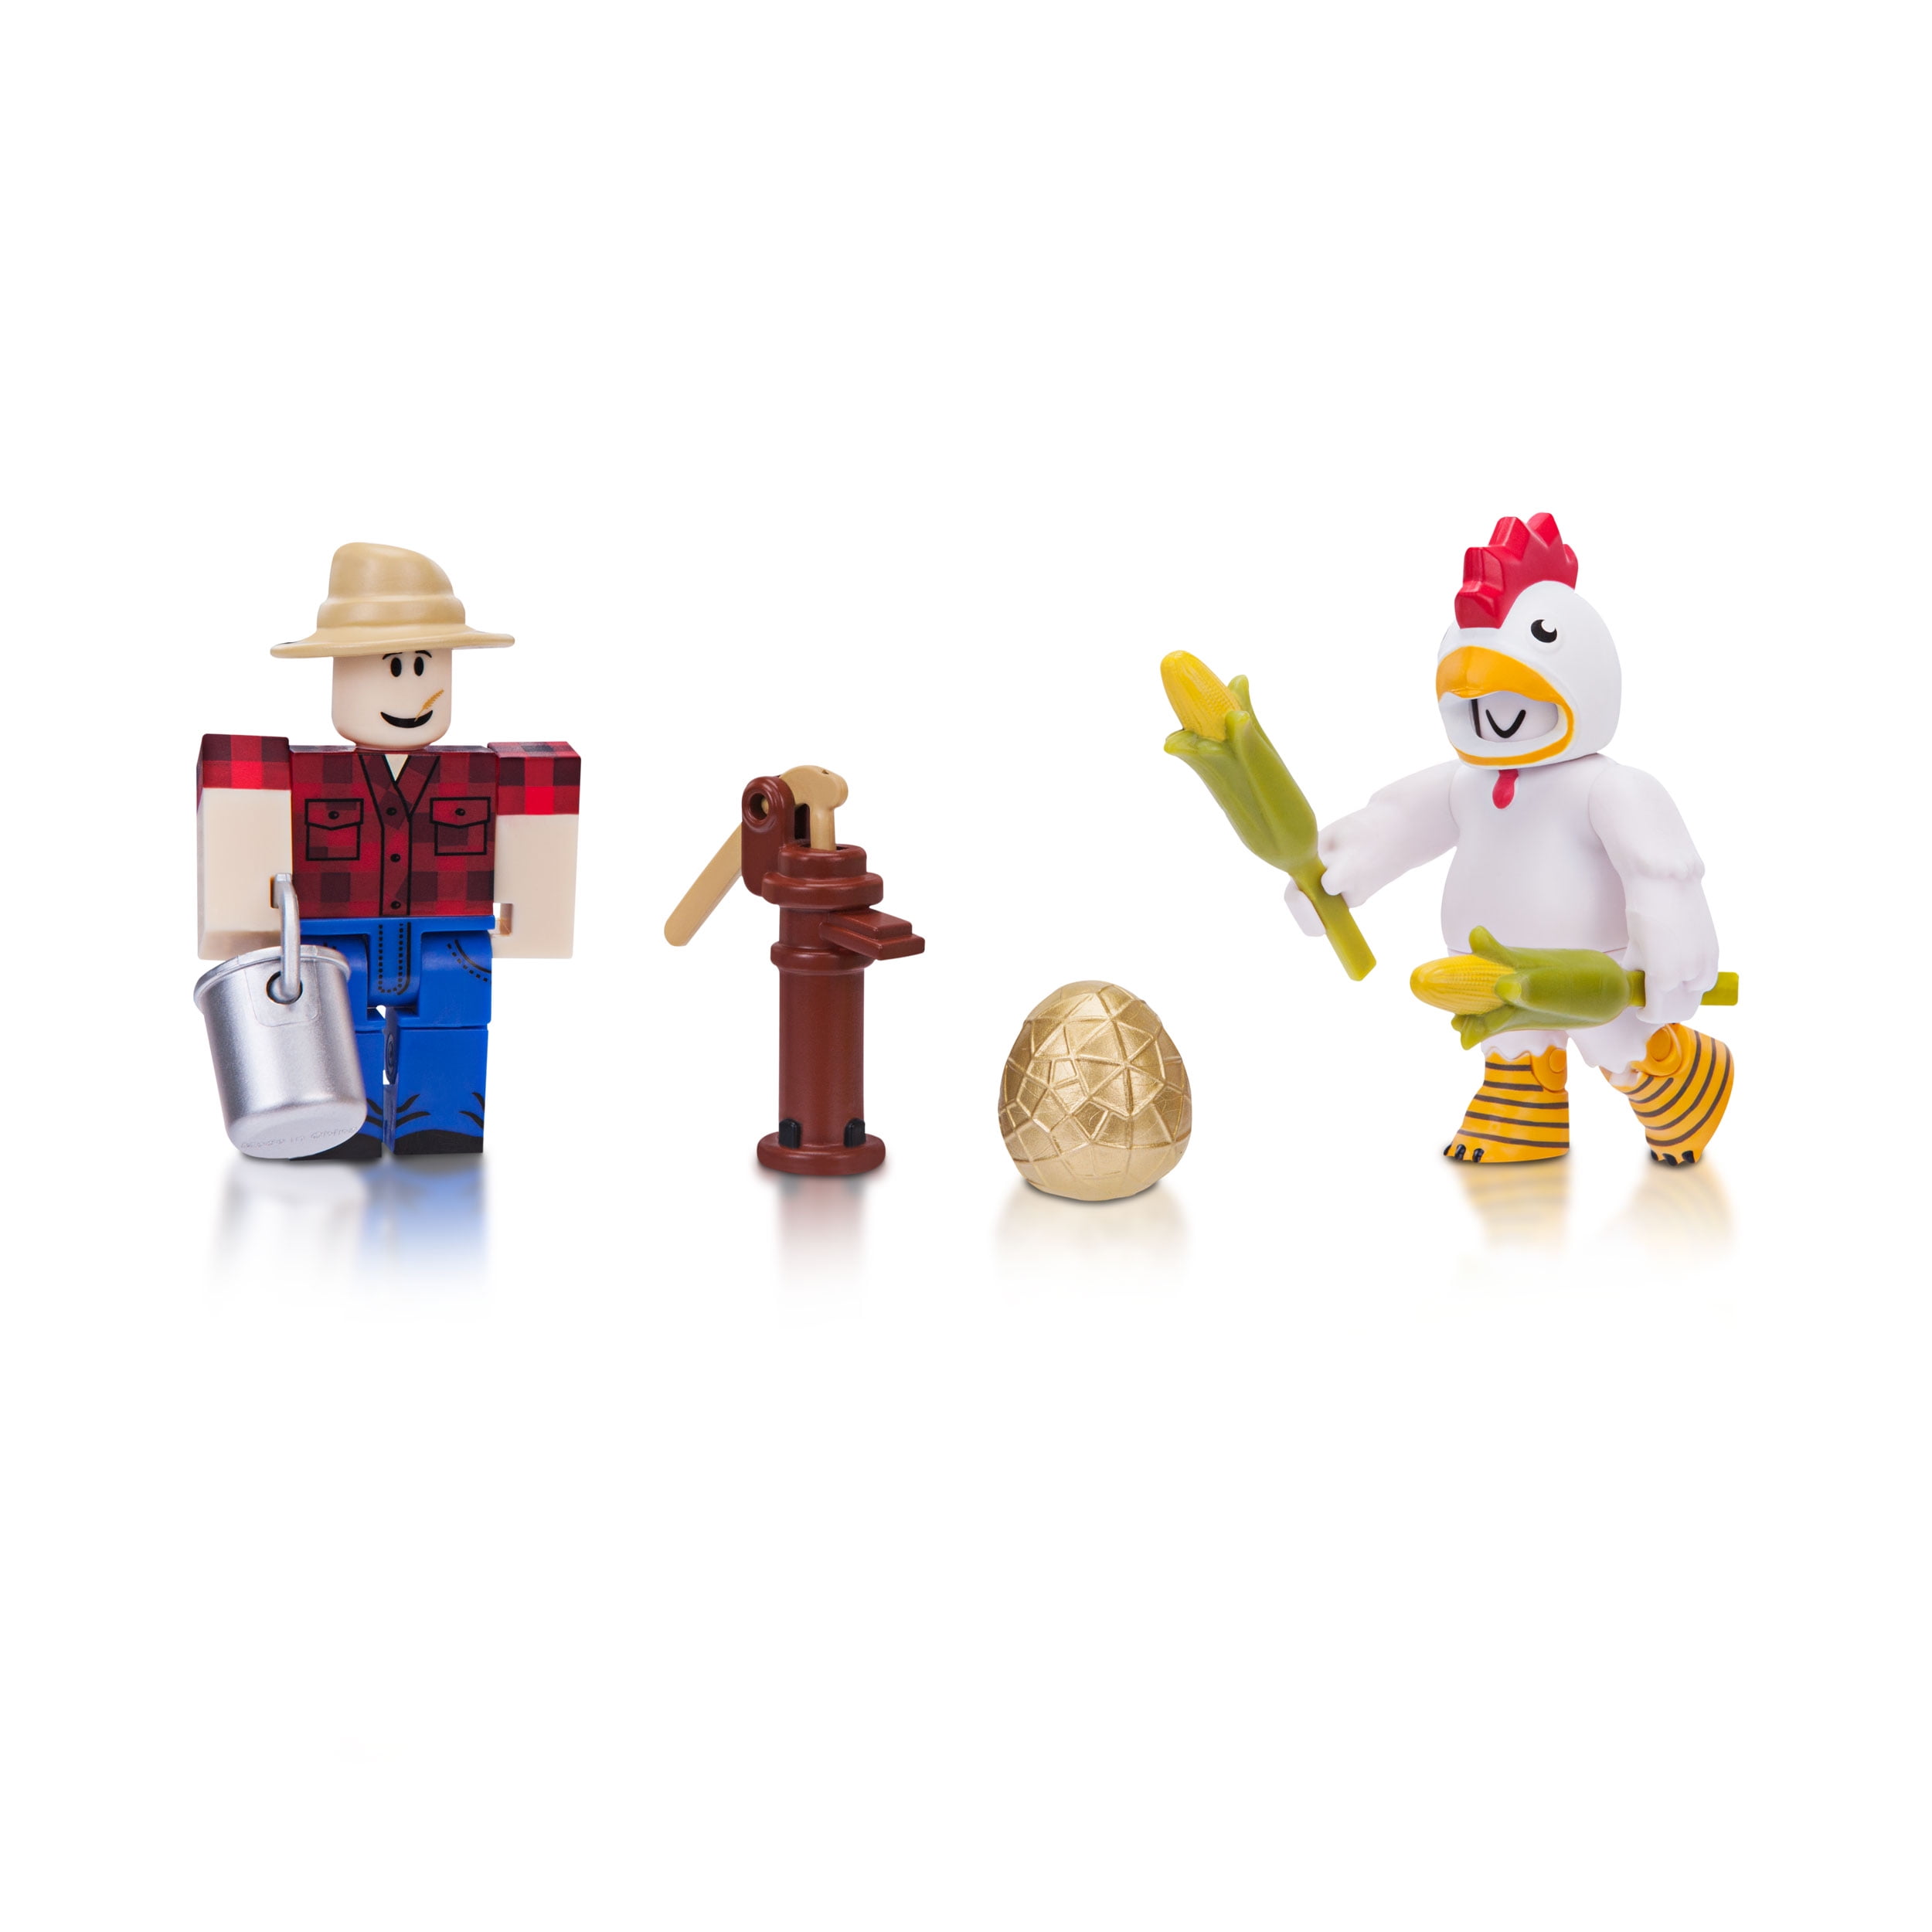 Roblox Action Collection Chicken Simulator Game Pack Includes Exclusive Virtual Item Walmart Com Walmart Com - please pick up after your dogs roblox scooping simulator with